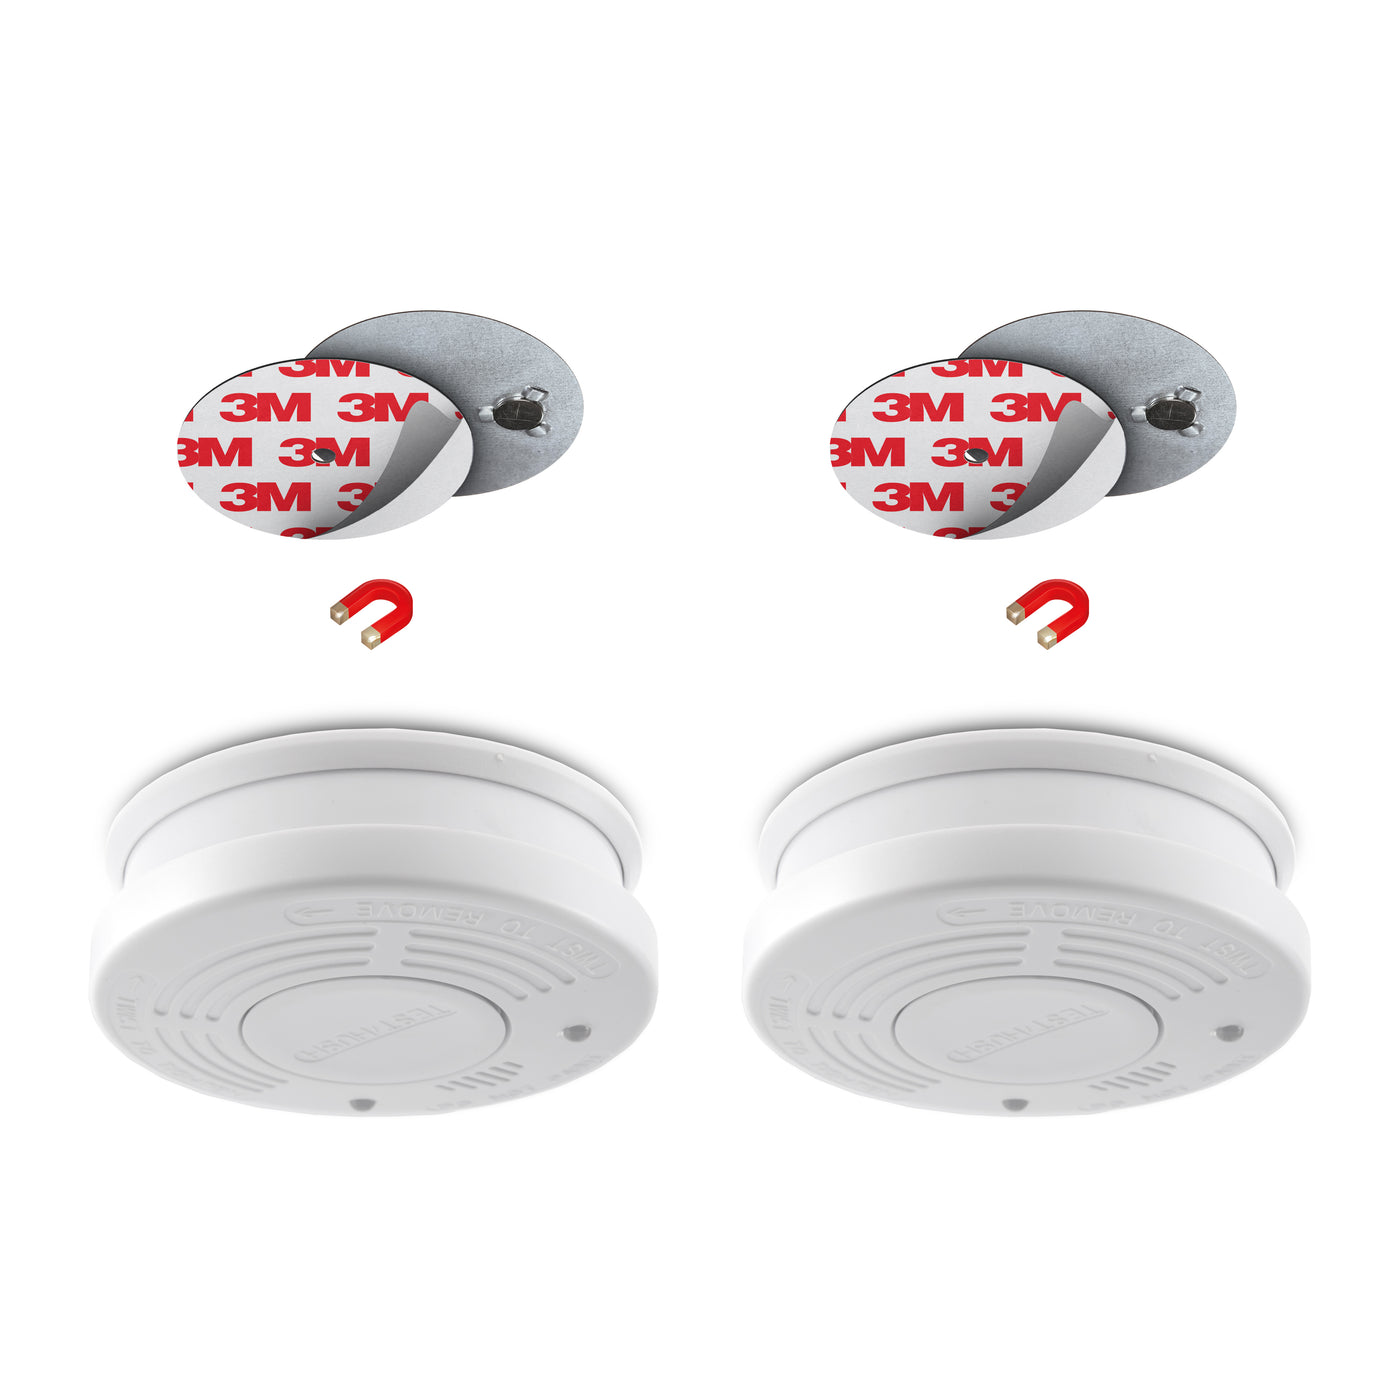 Alecto BPB20 - Fire safety kit with 2 smoke detectors and 2 magnetic mounting plates